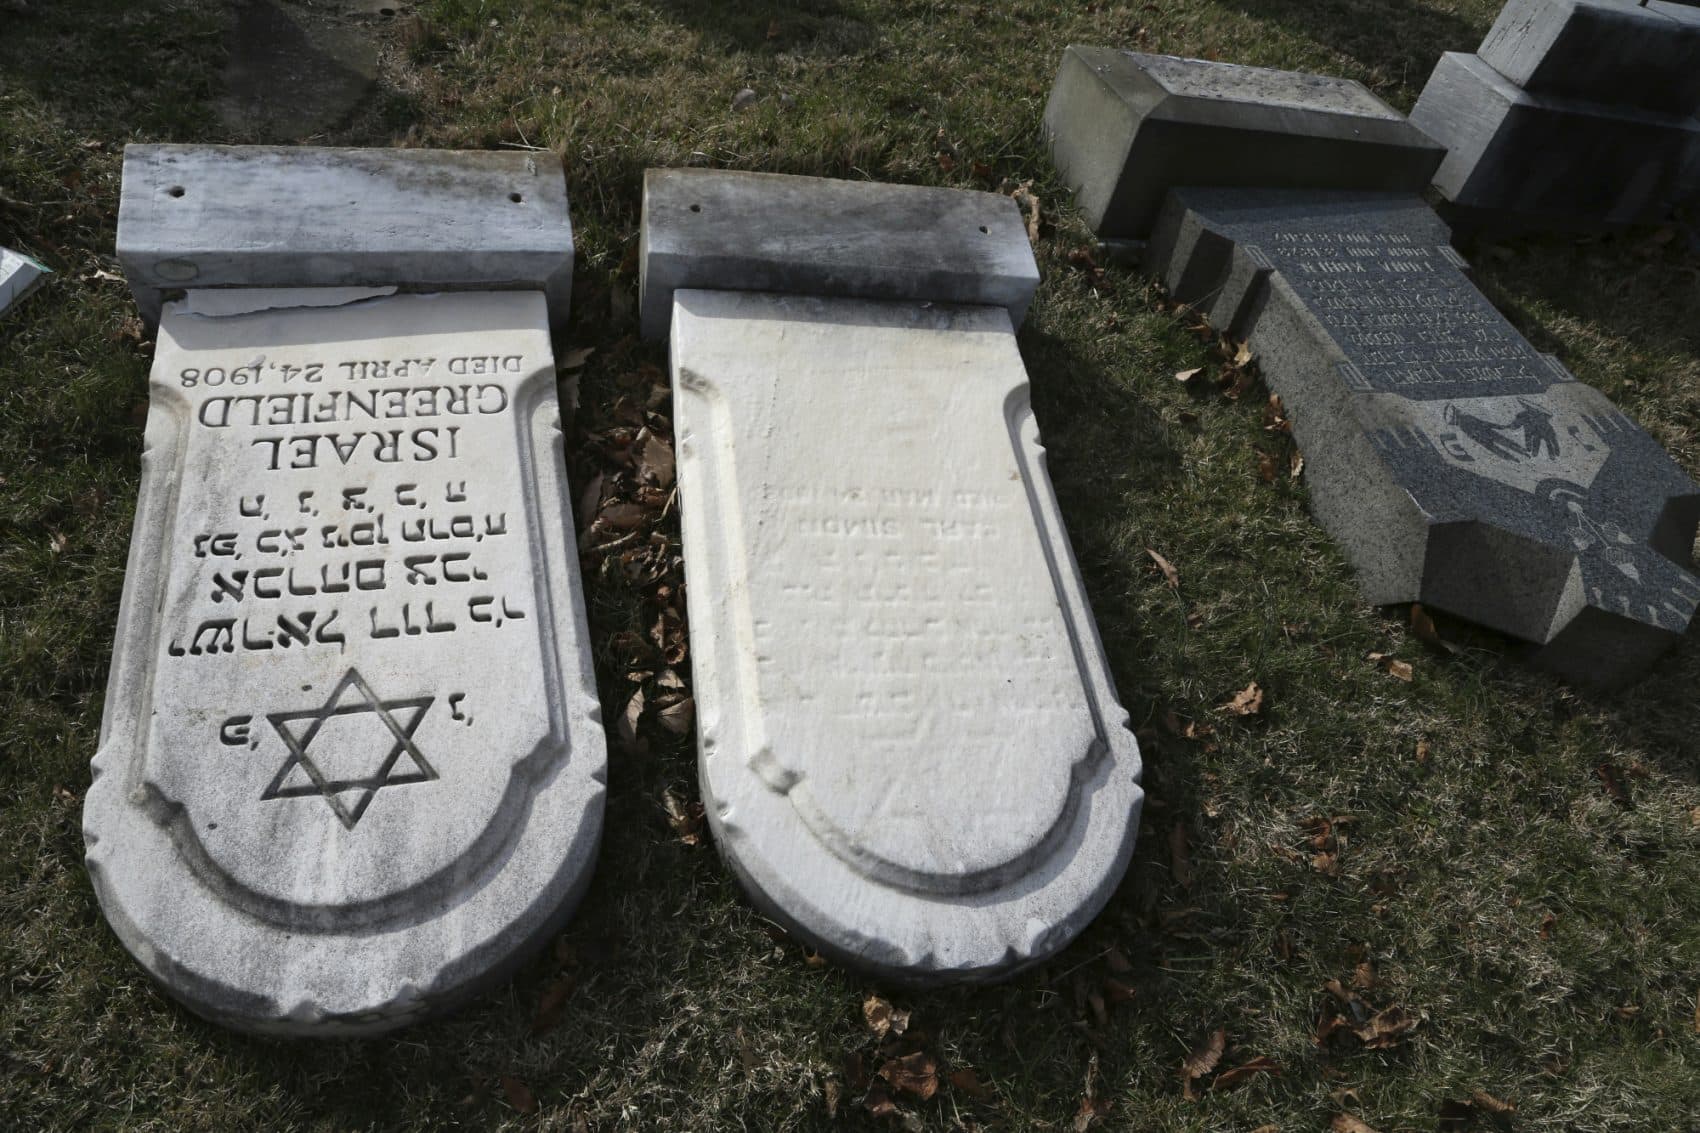 Two Muslim activists, Linda Sarsour and Tarek El-Messidi, teamed up to raise funds to repair the damage, writes Peter Guthrie. Pictured: Damaged headstones are seen at Mount Carmel cemetery Monday, Feb. 27, 2017, in Philadelphia. More than 100 headstones have been vandalized at the Jewish cemetery in Philadelphia, damage discovered less than a week after similar vandalism in Missouri, authorities said. (Jacqueline Larma/AP)